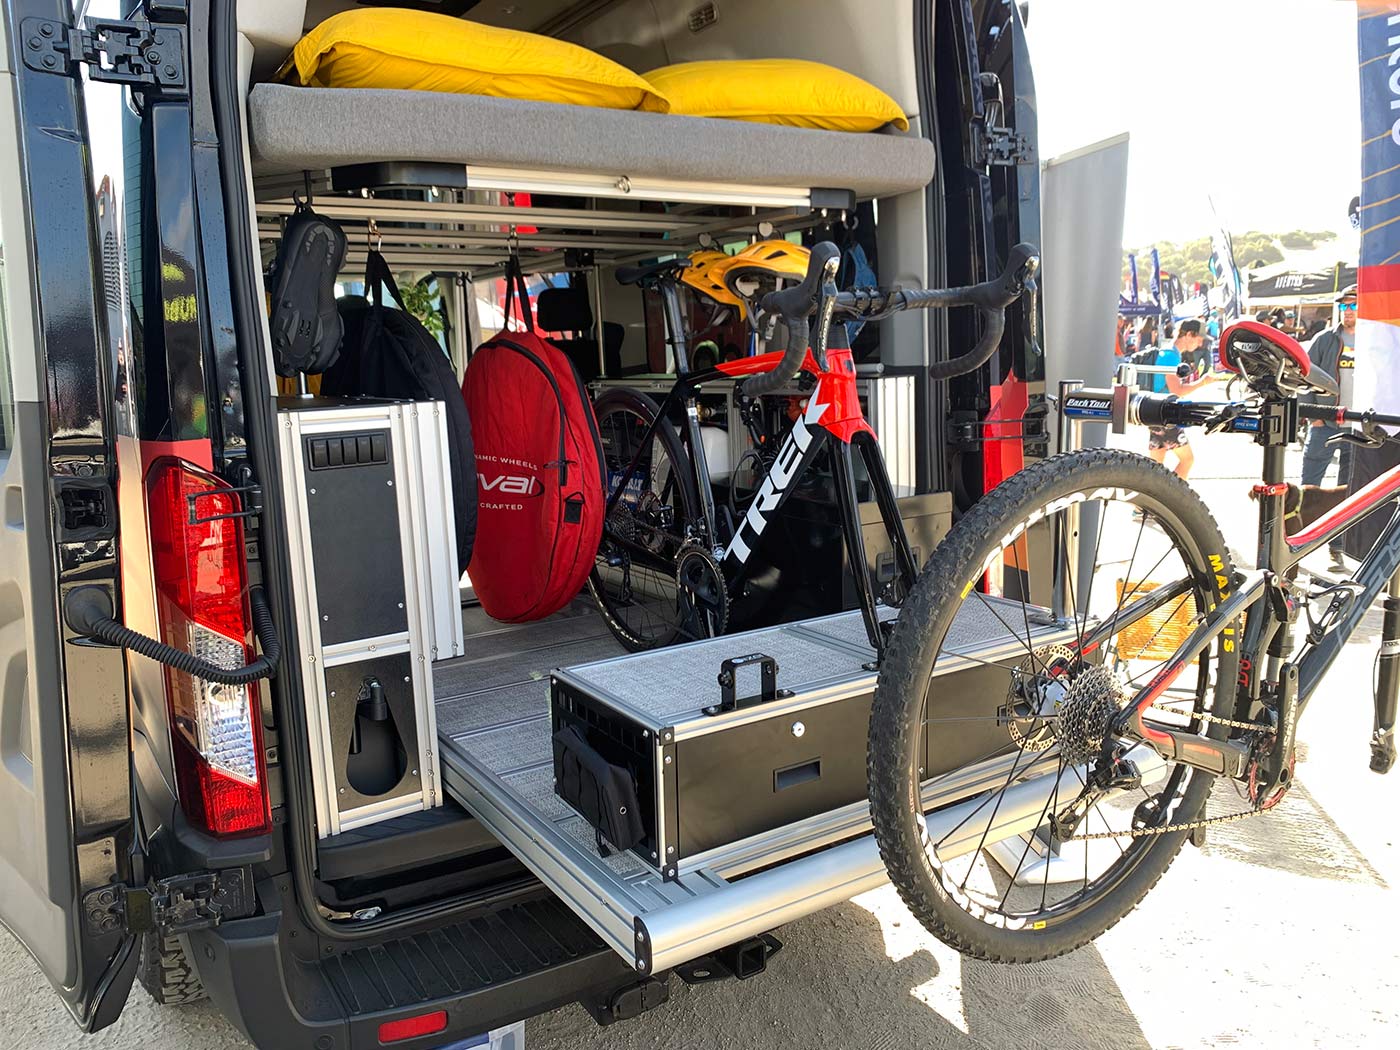 vandoit custom camper van with modular interior and slide-out bike tray and workstand